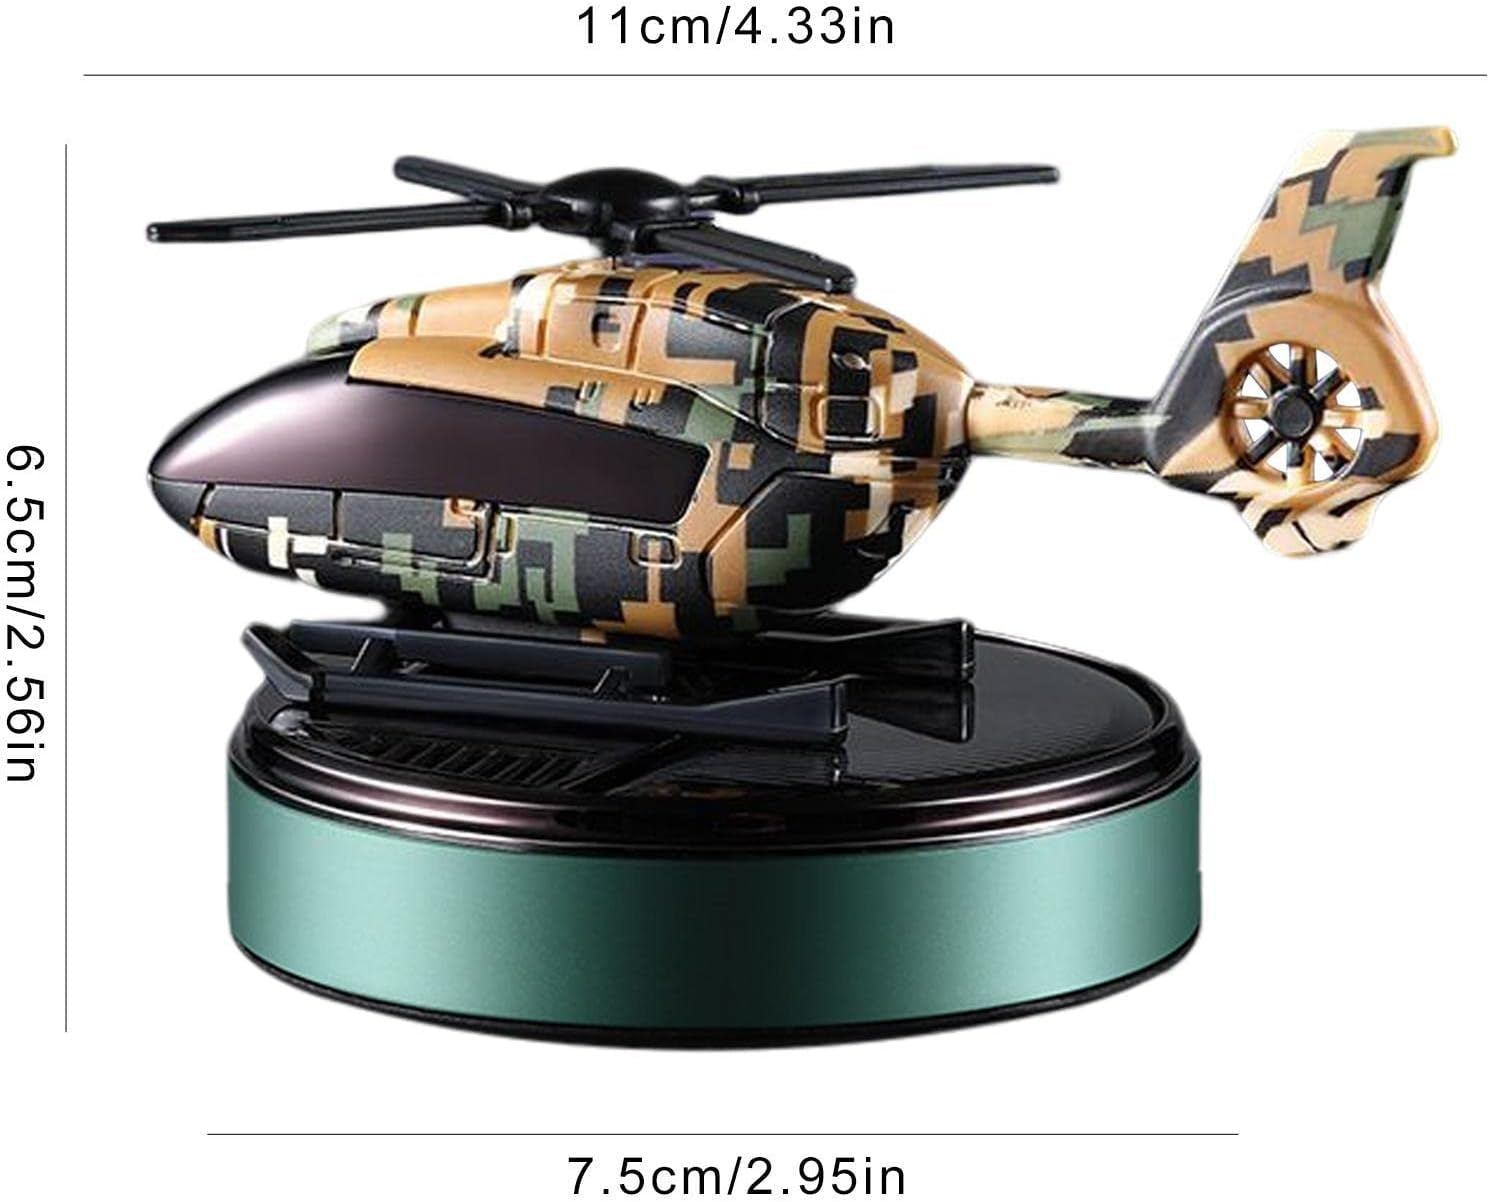 Solar-Powered Helicopter Car Air Freshener - Innovative Solar Car Perfume for a Creative and Fresh Driving Experience